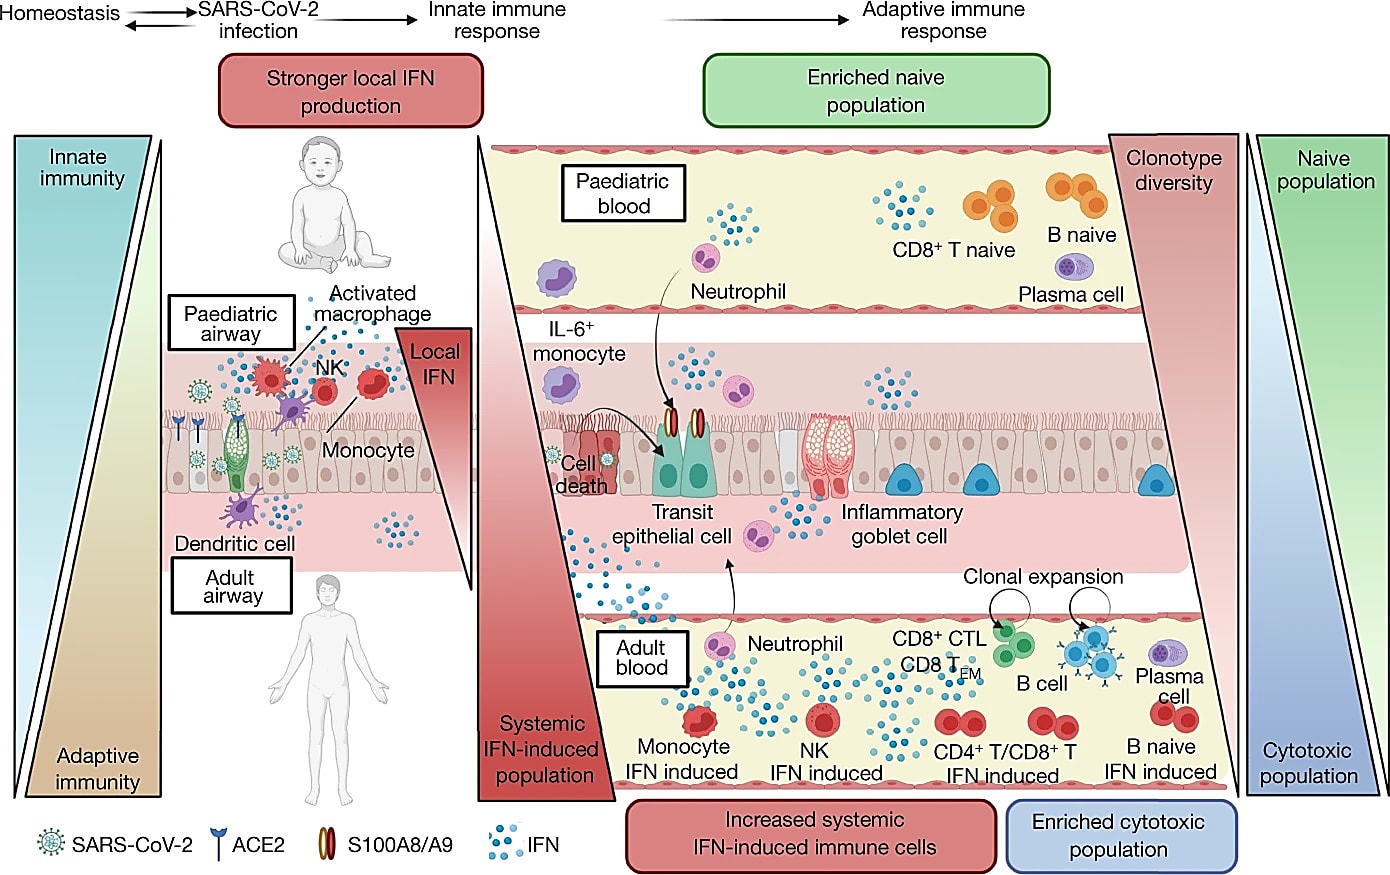 Summary of the local and systemic response to SARS-CoV-2 infection in children and adults as represented in Figure 4 from  Yoshida M et al. Nature (2021), used under Creative Commons Attribution 4.0 International License. The image has not been modified in any way.